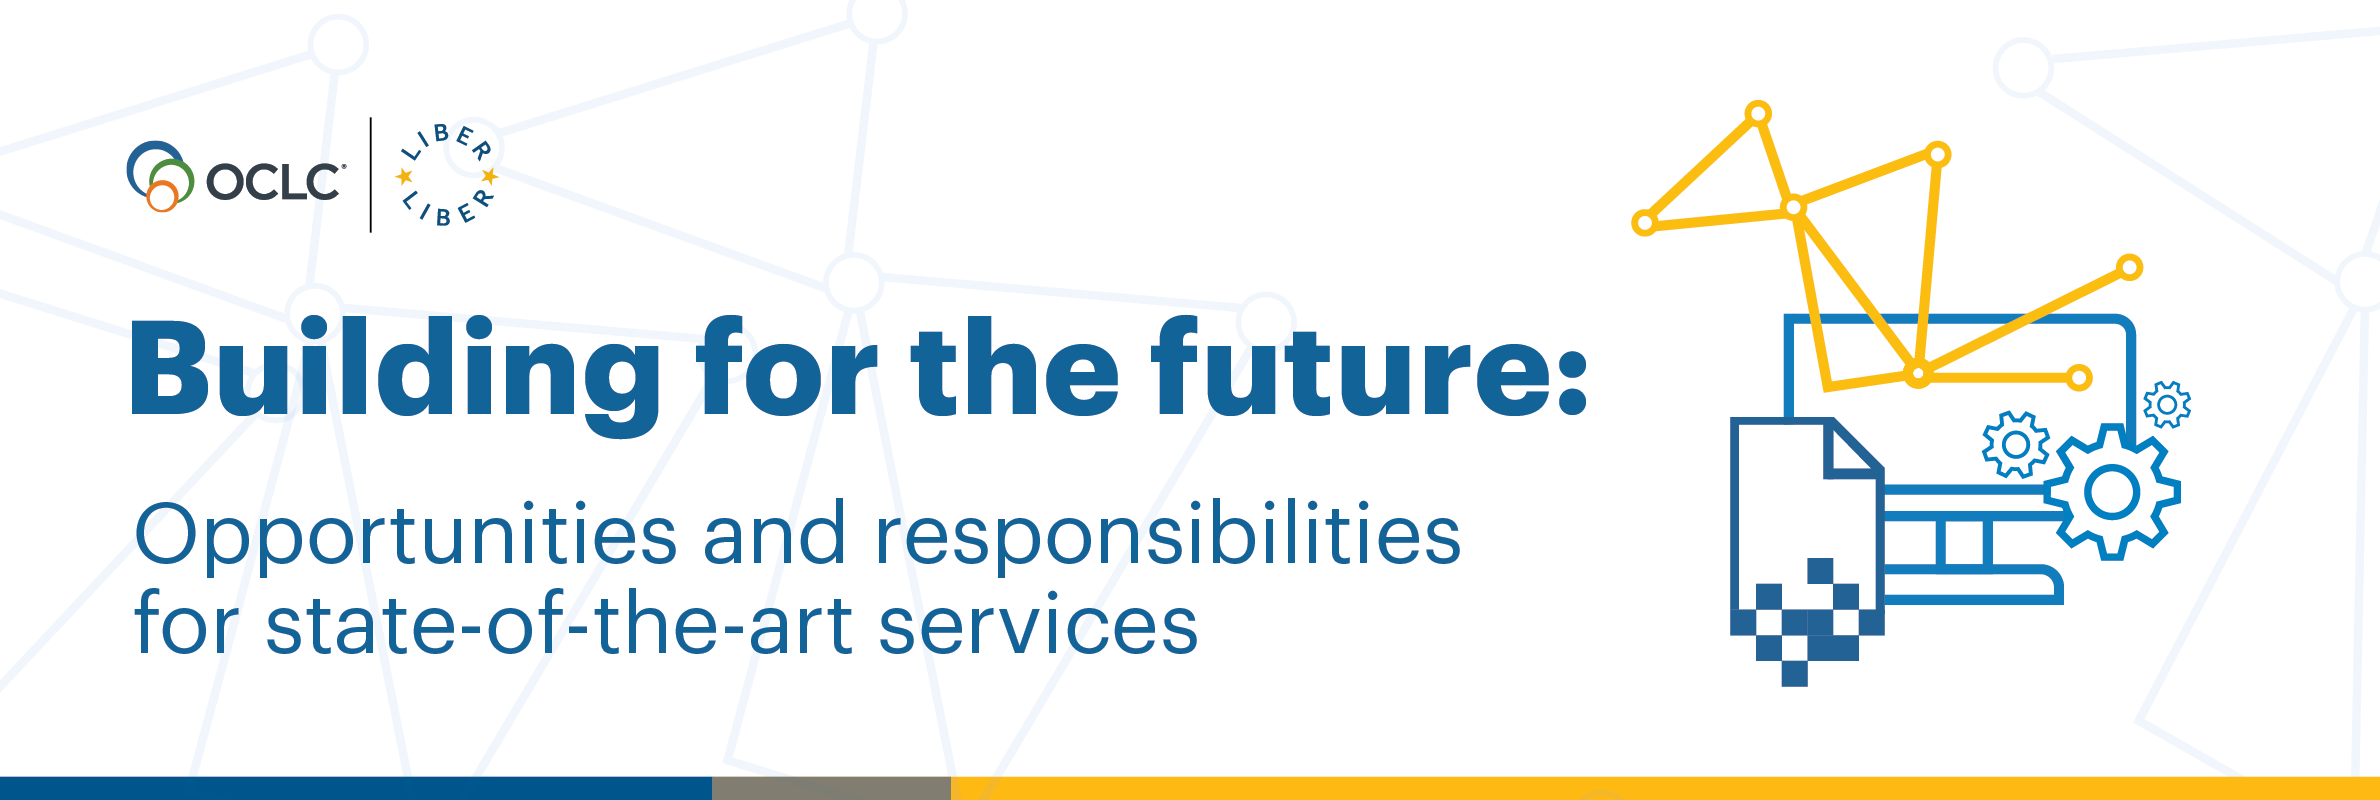 Building for the future: Opportunities and responsibilities for state-of-the-art services